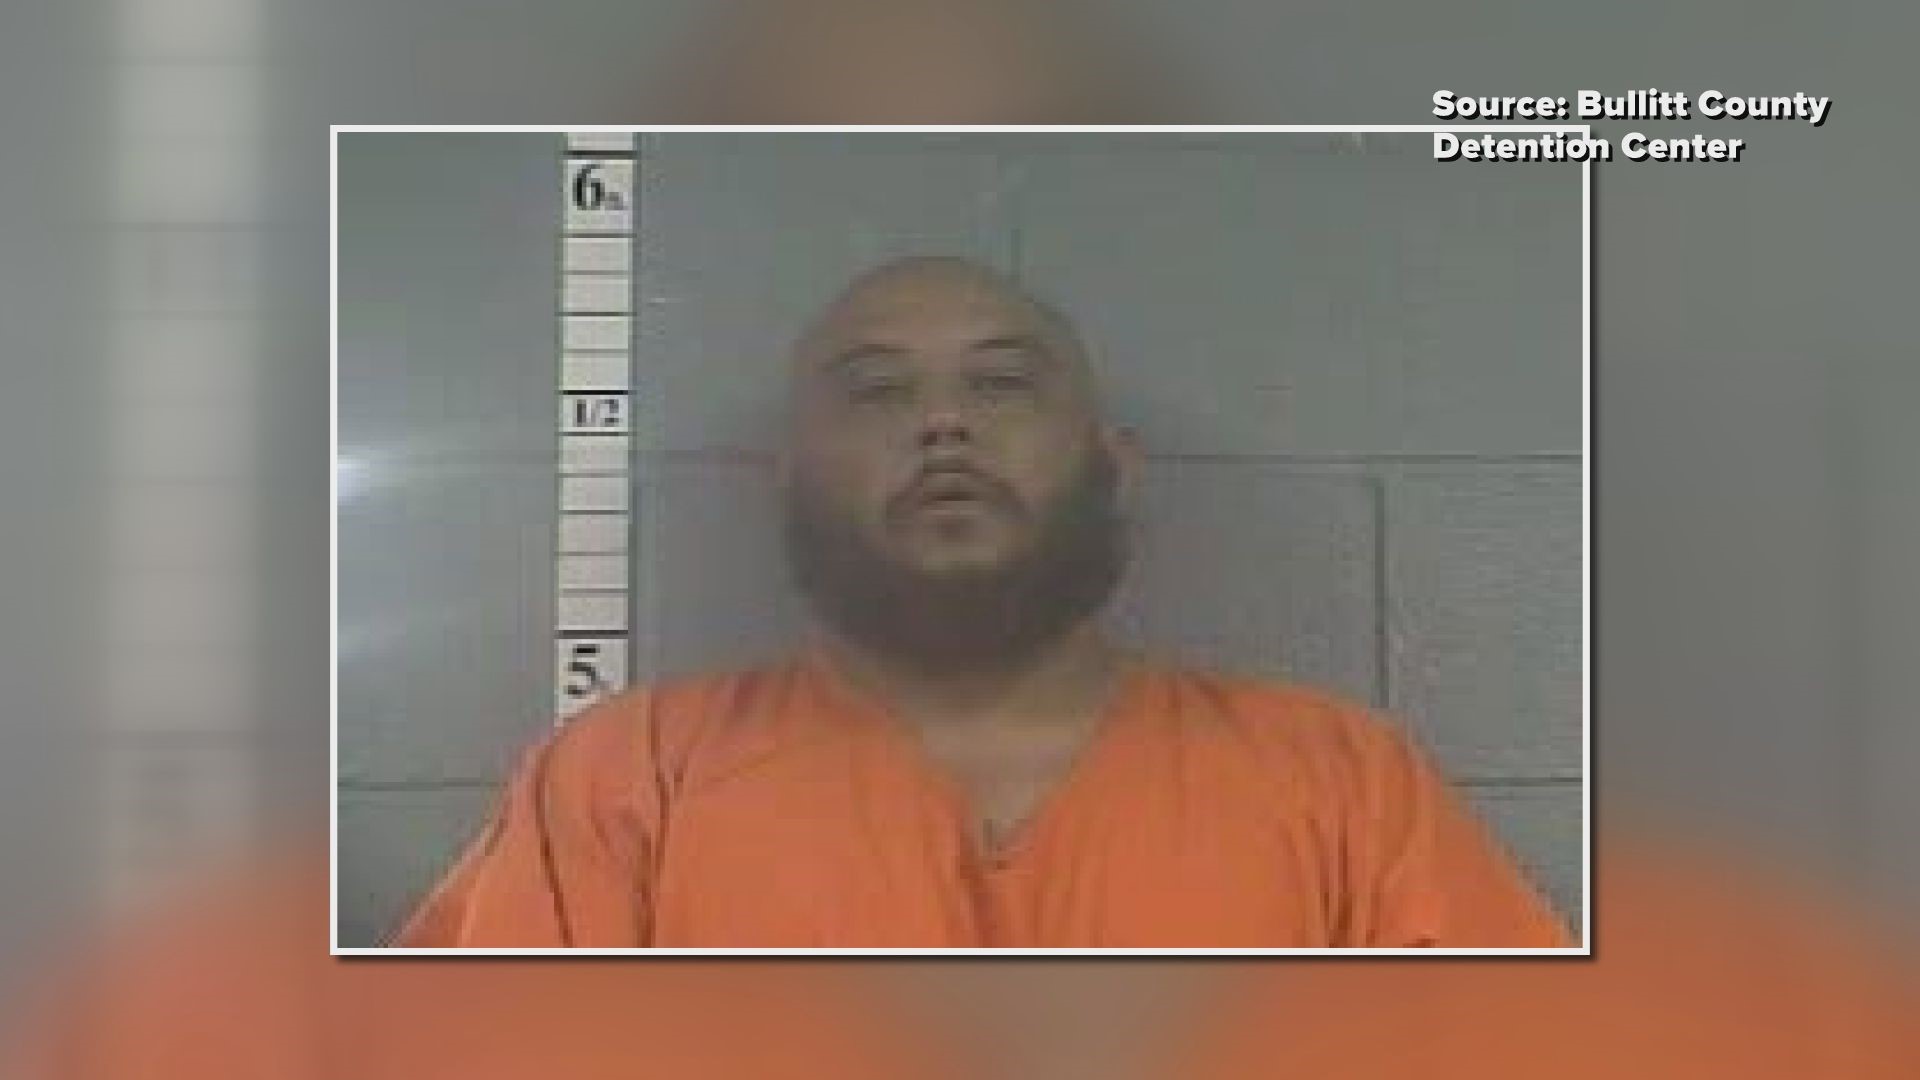 Two people died in the Monday shooting in Rockingham County. The next day, officers arrested the suspect in Kentucky.